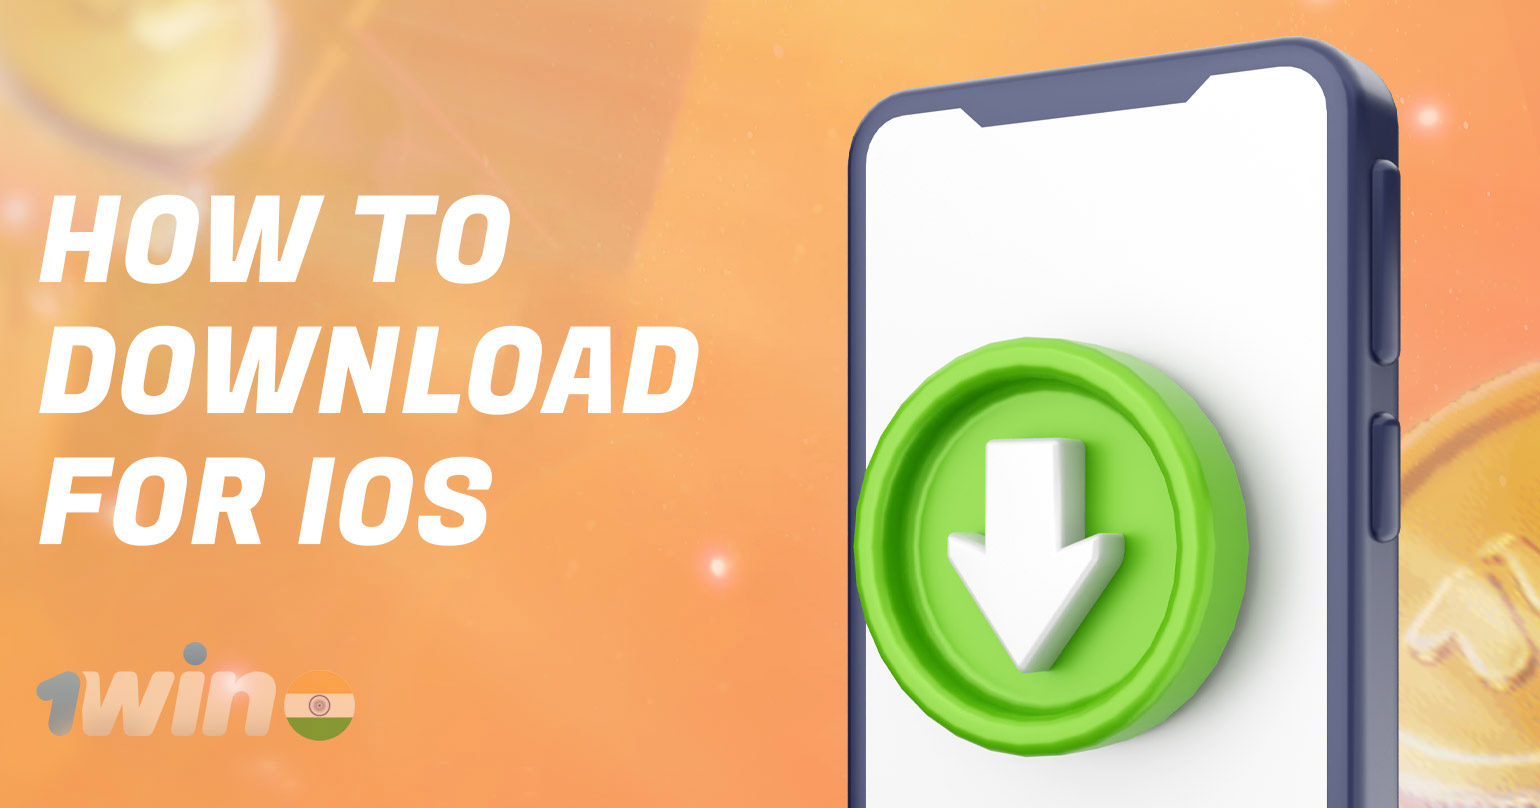 Detailed instructions on how to download an apk file for iOS. 